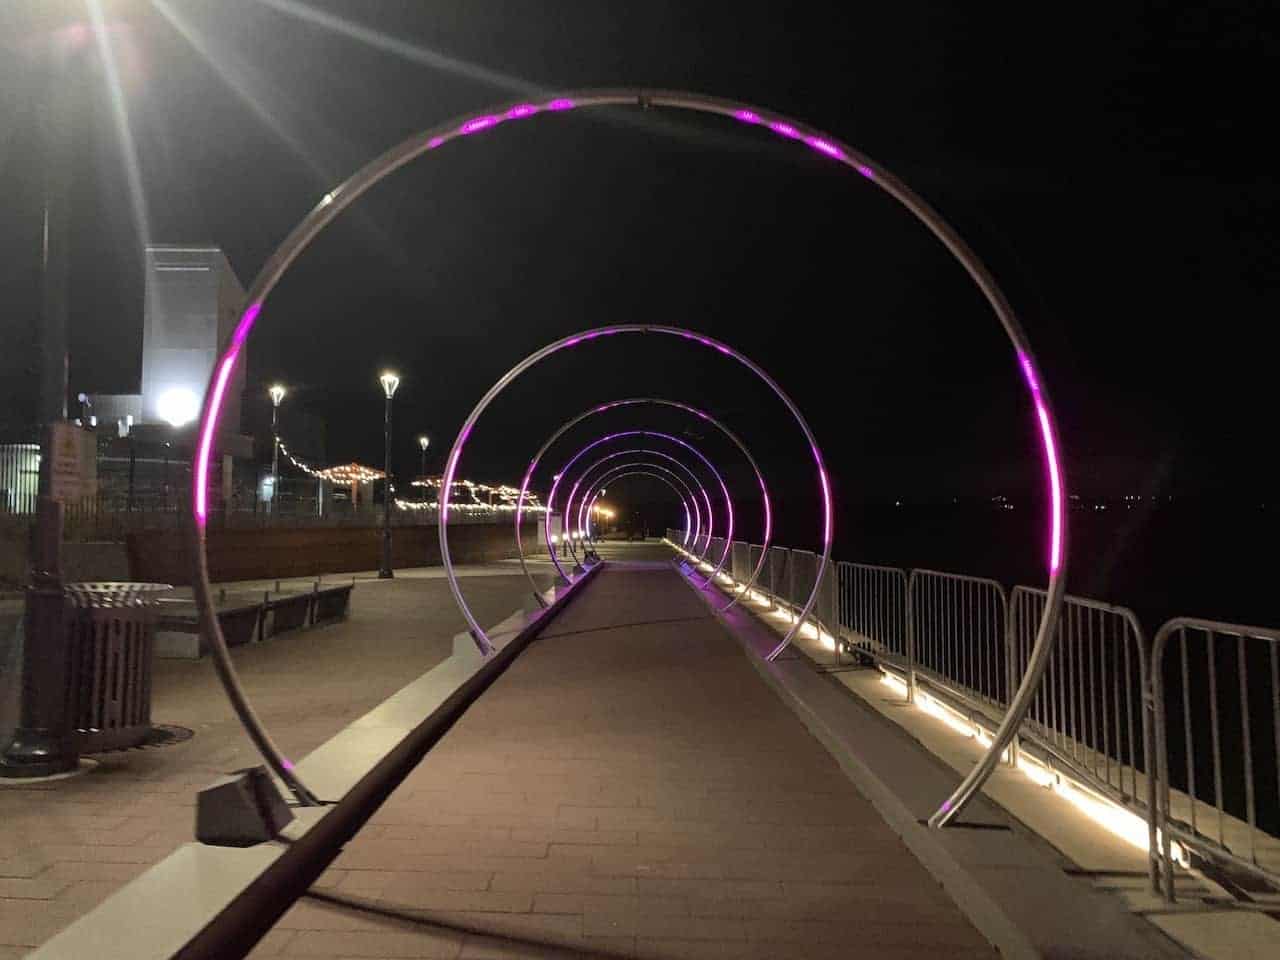 Pier 8 Hamilton Ontario Sonic Runway - The Sonic Runway on Pier 8 in Hamilton, Ontario created a memorable experience as we walked through the LED arches along the water.